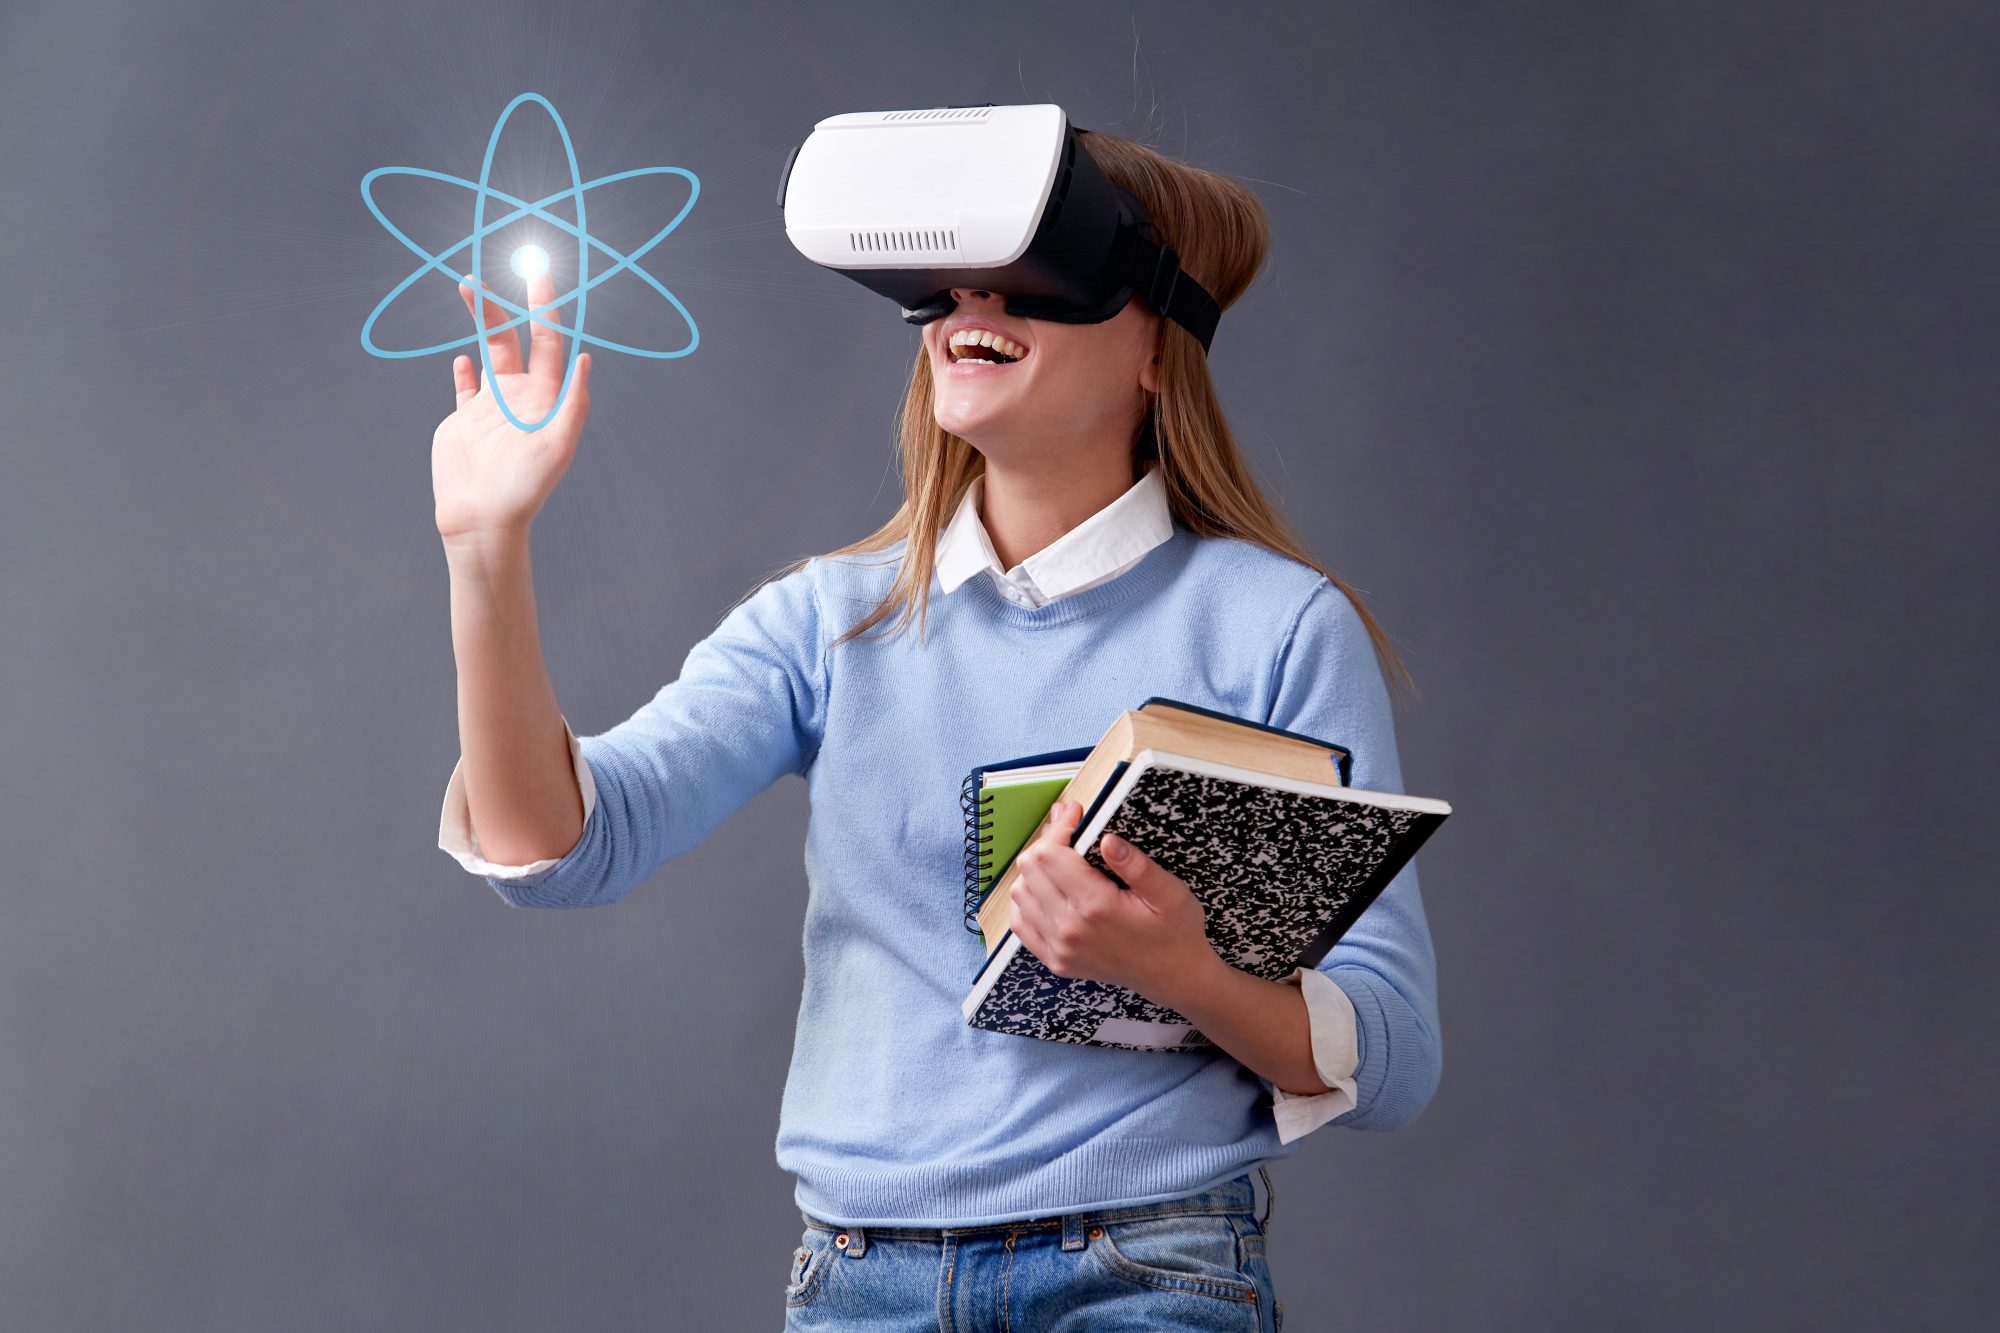 augmented and virtual reality technology essential education?